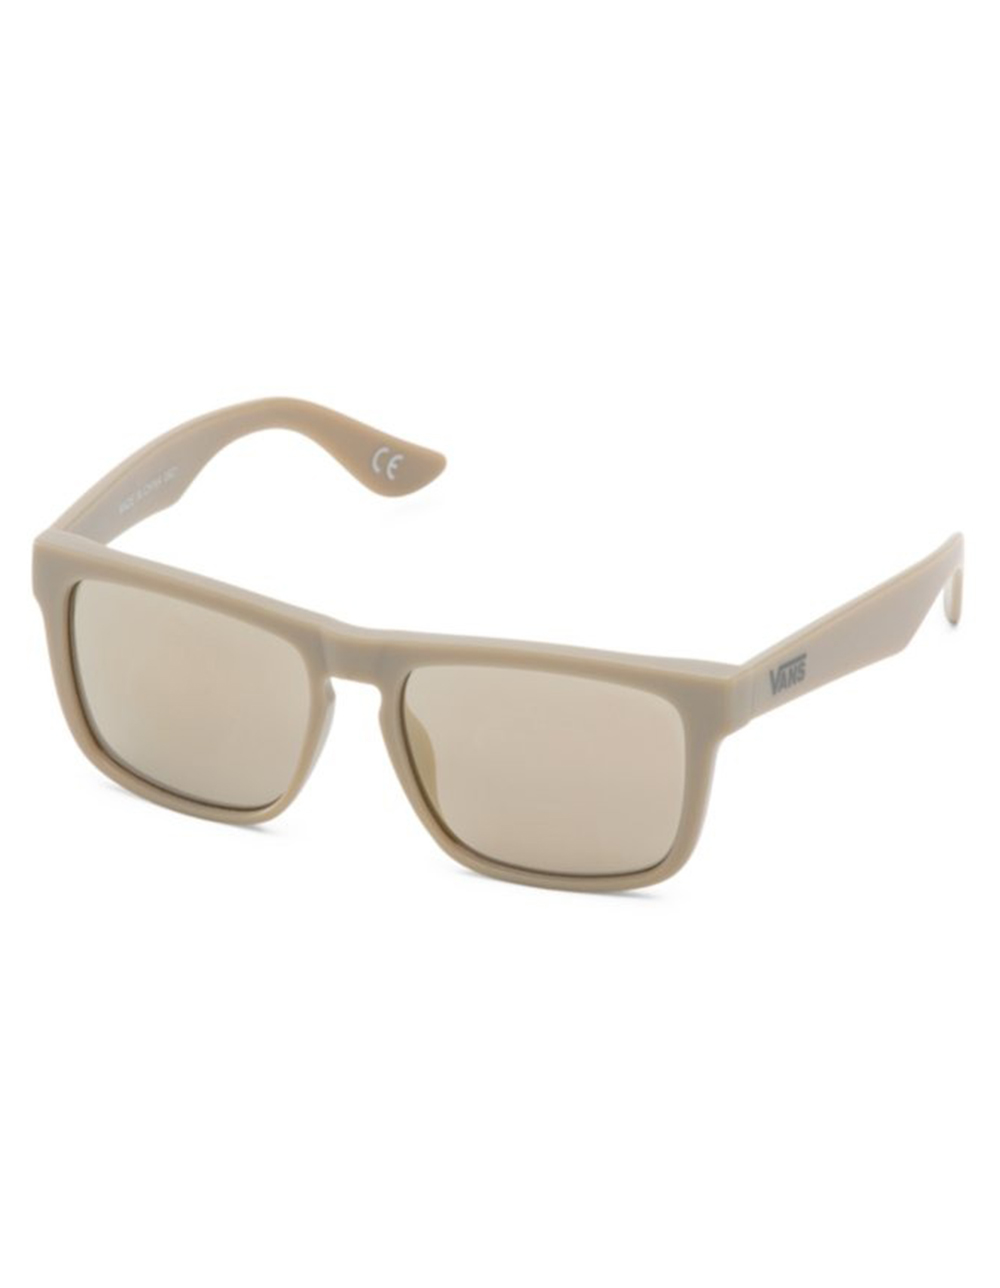 VANS Squared Off Sunglasses - Tillys | TAUPE